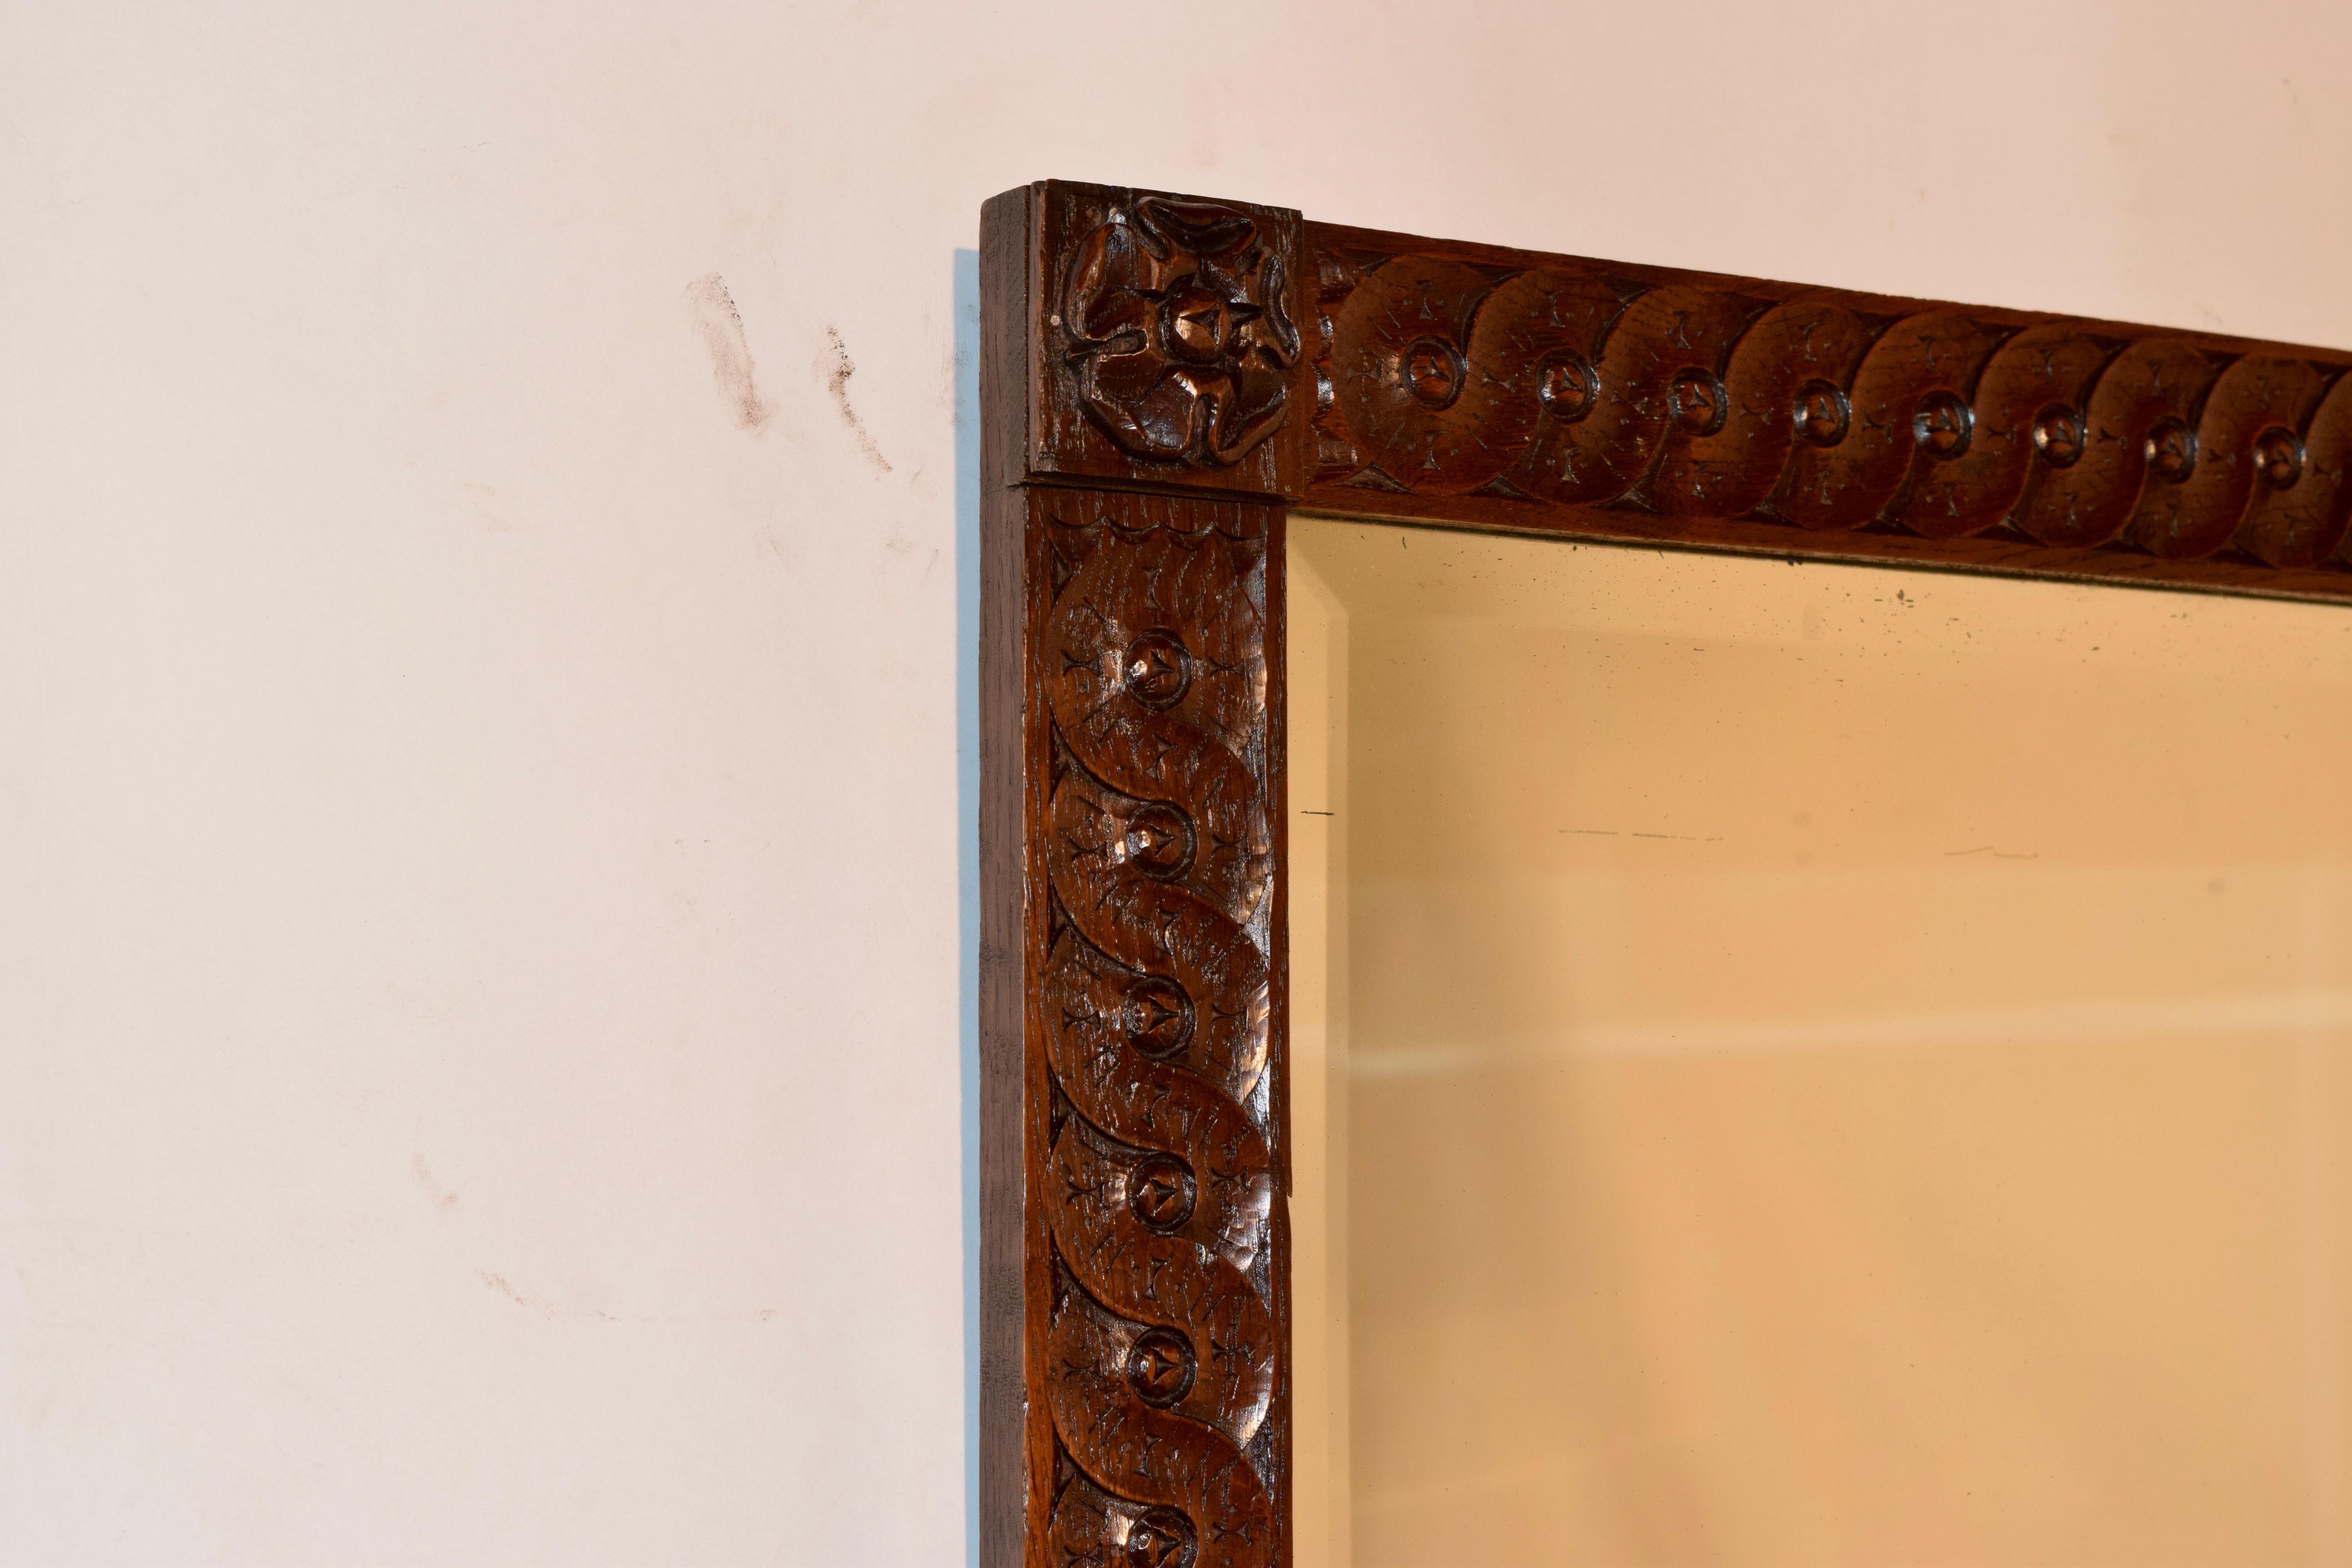 19th century oak hand carved mirror from England with Tudor rose carvings at all four corners of the frame surrounded by hand carved framing. Original beveled mirror with wear to mercury glass.